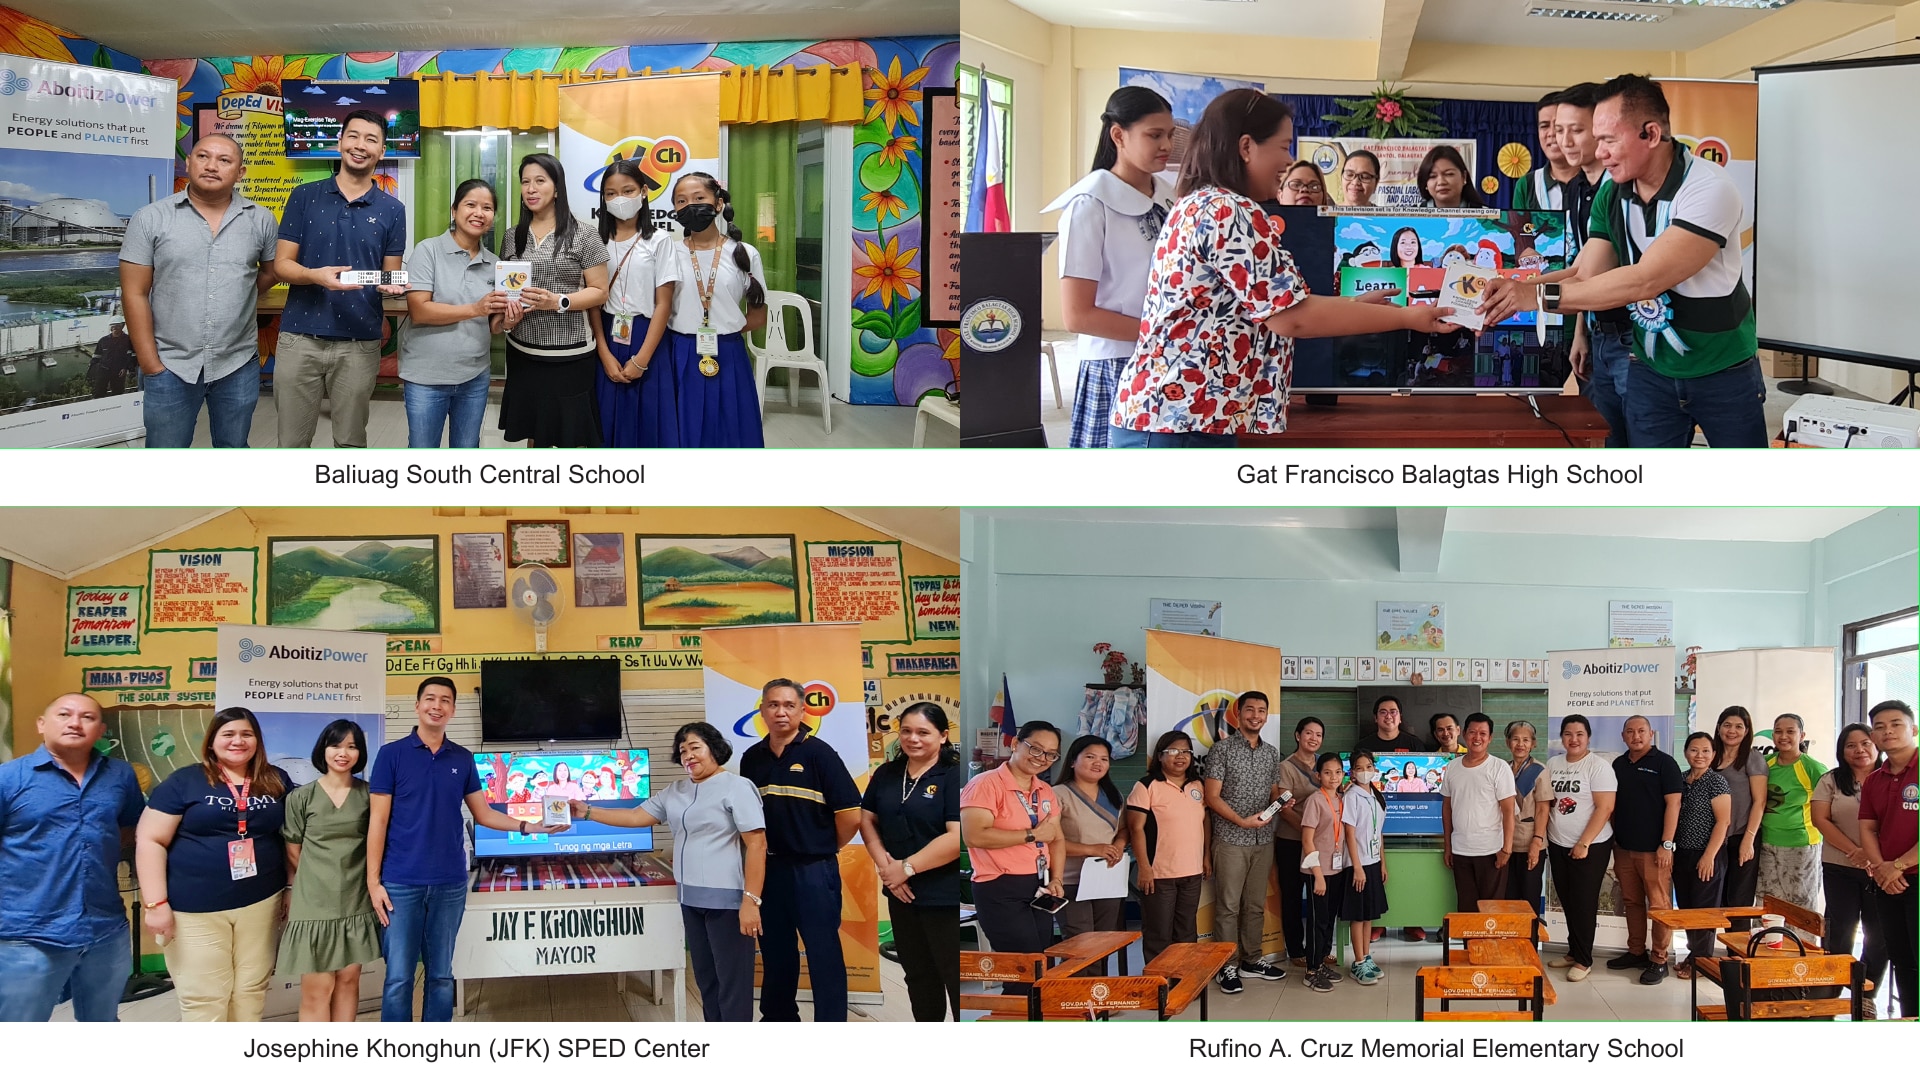 Knowledge Channel media library reaches more students in Luzon